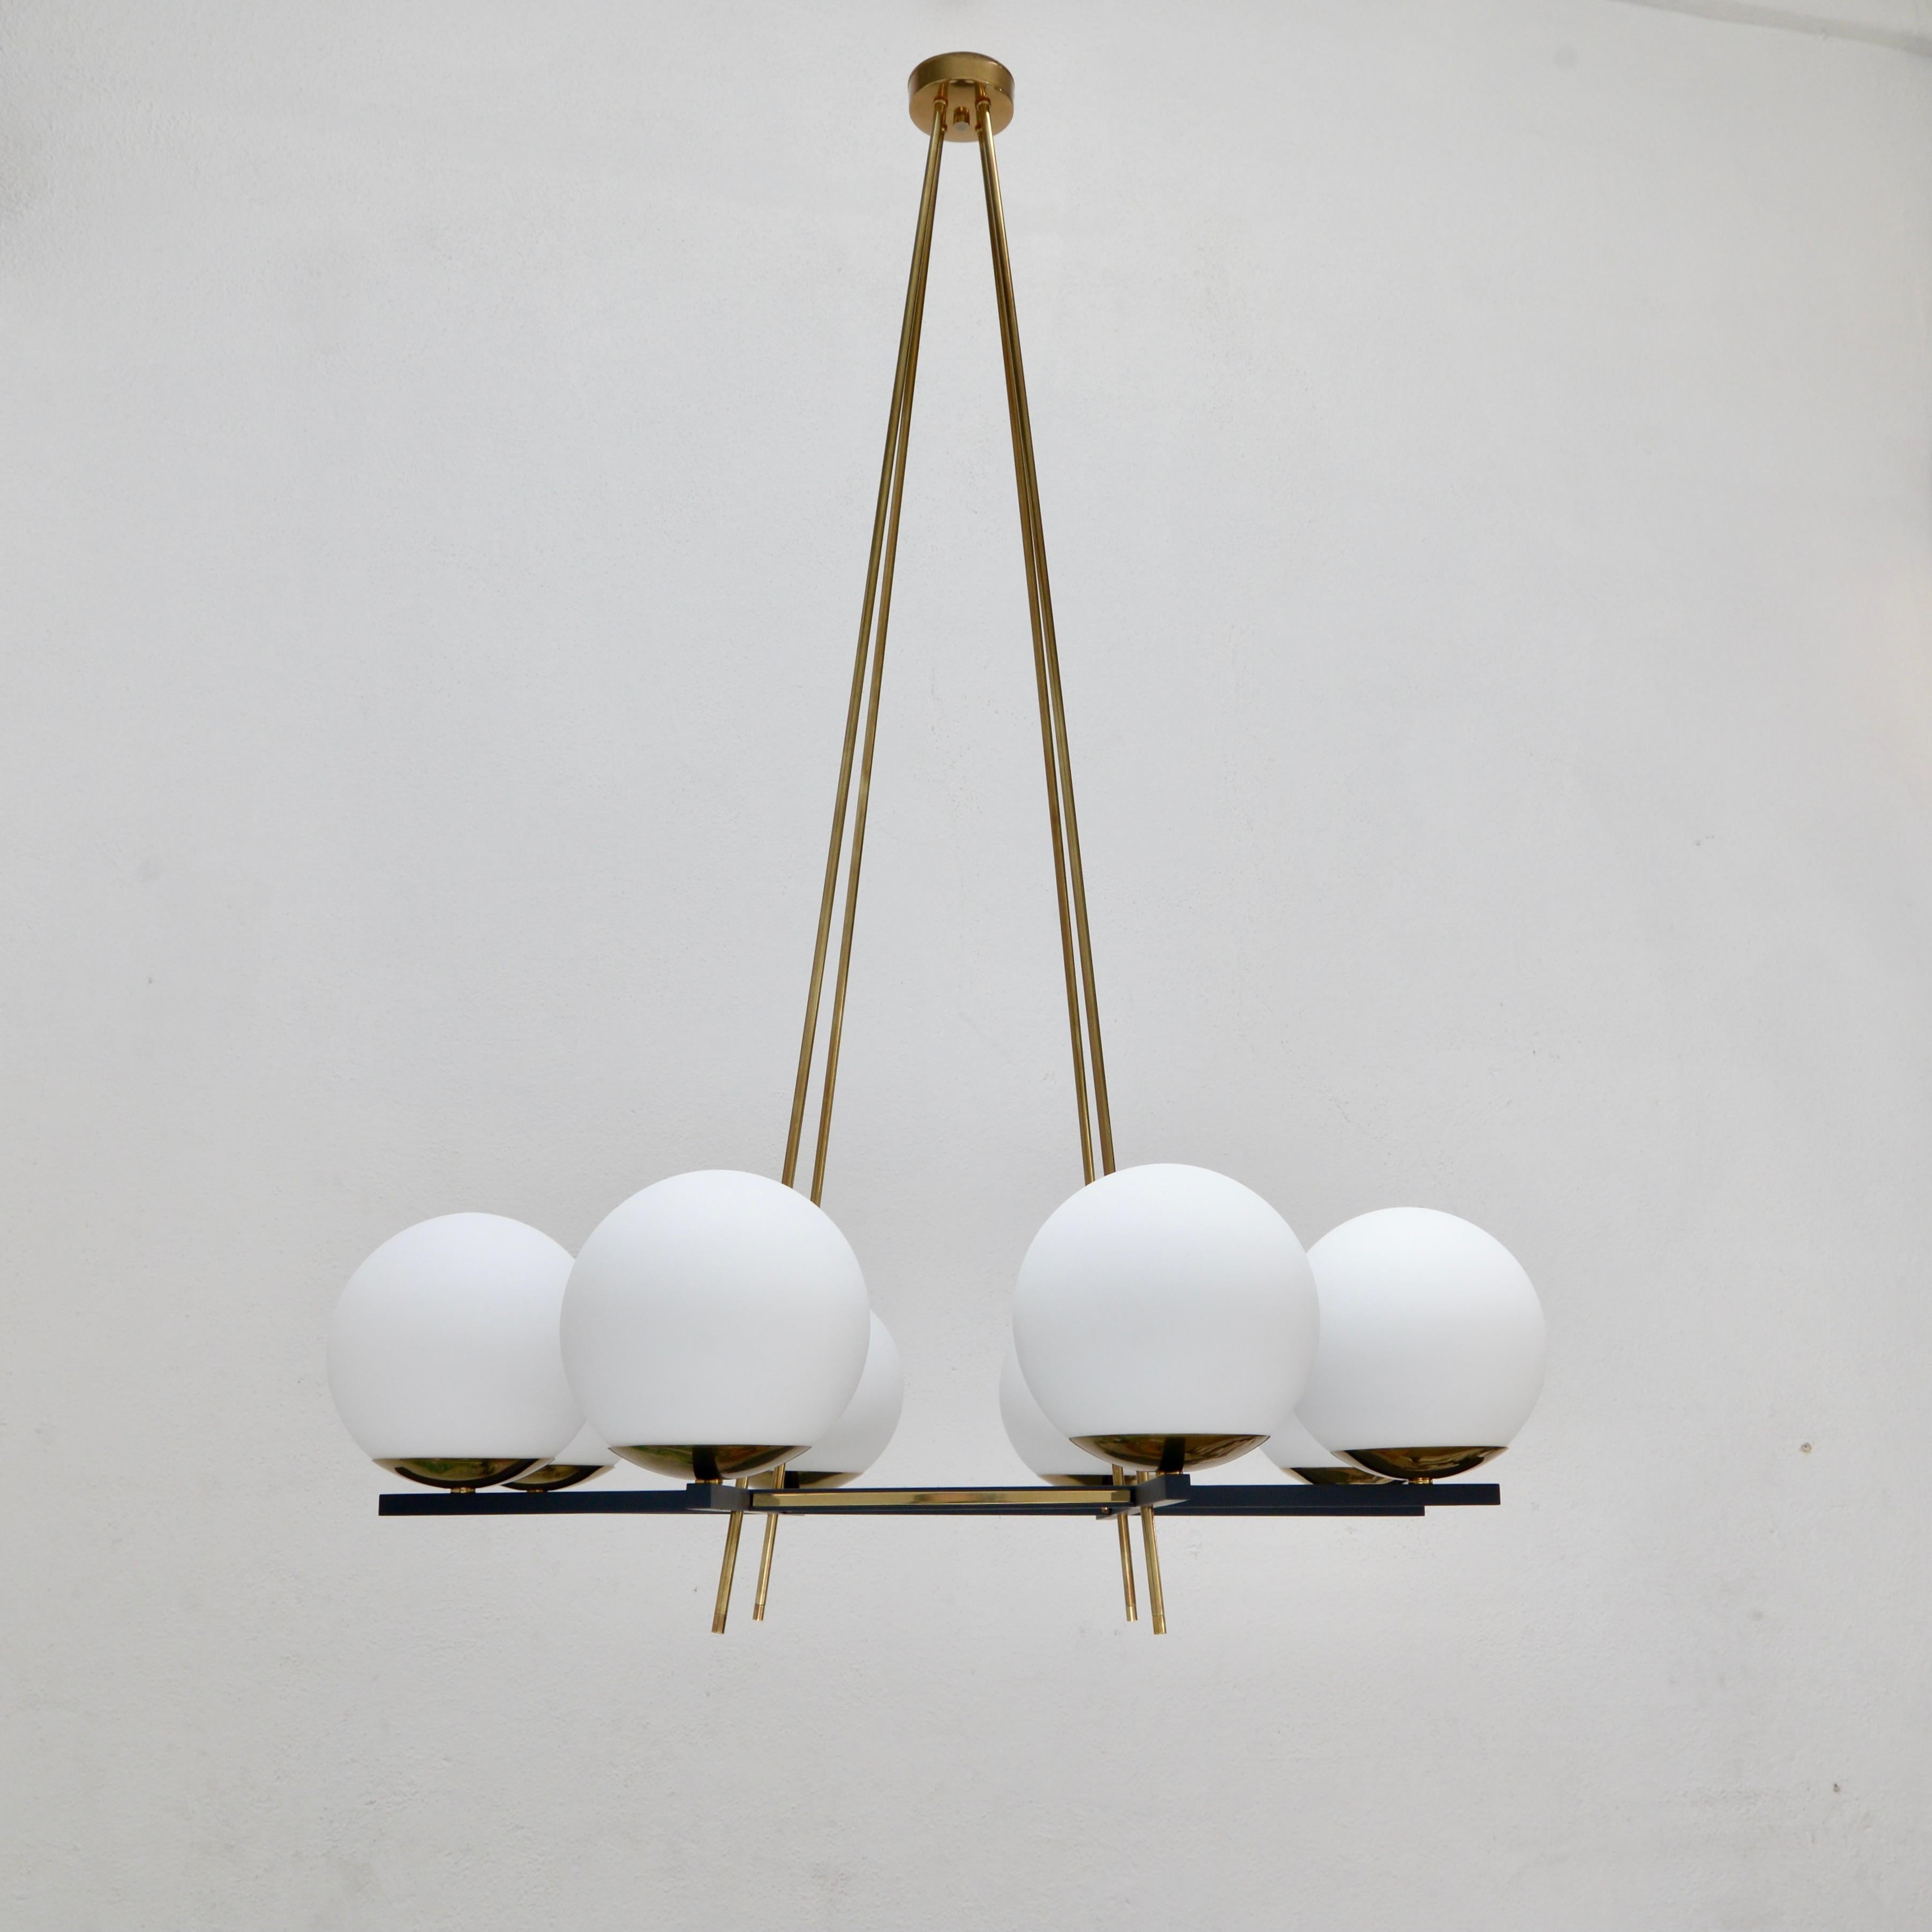 Stunning LUglo, an 8 globe glass shade chandelier inspired by classical mid century Italian design. Made in glass, steel, aluminum and aged brass. Featuring an elegant grid pattern, this chandelier is wired with 1-E12 candelabra based socket per